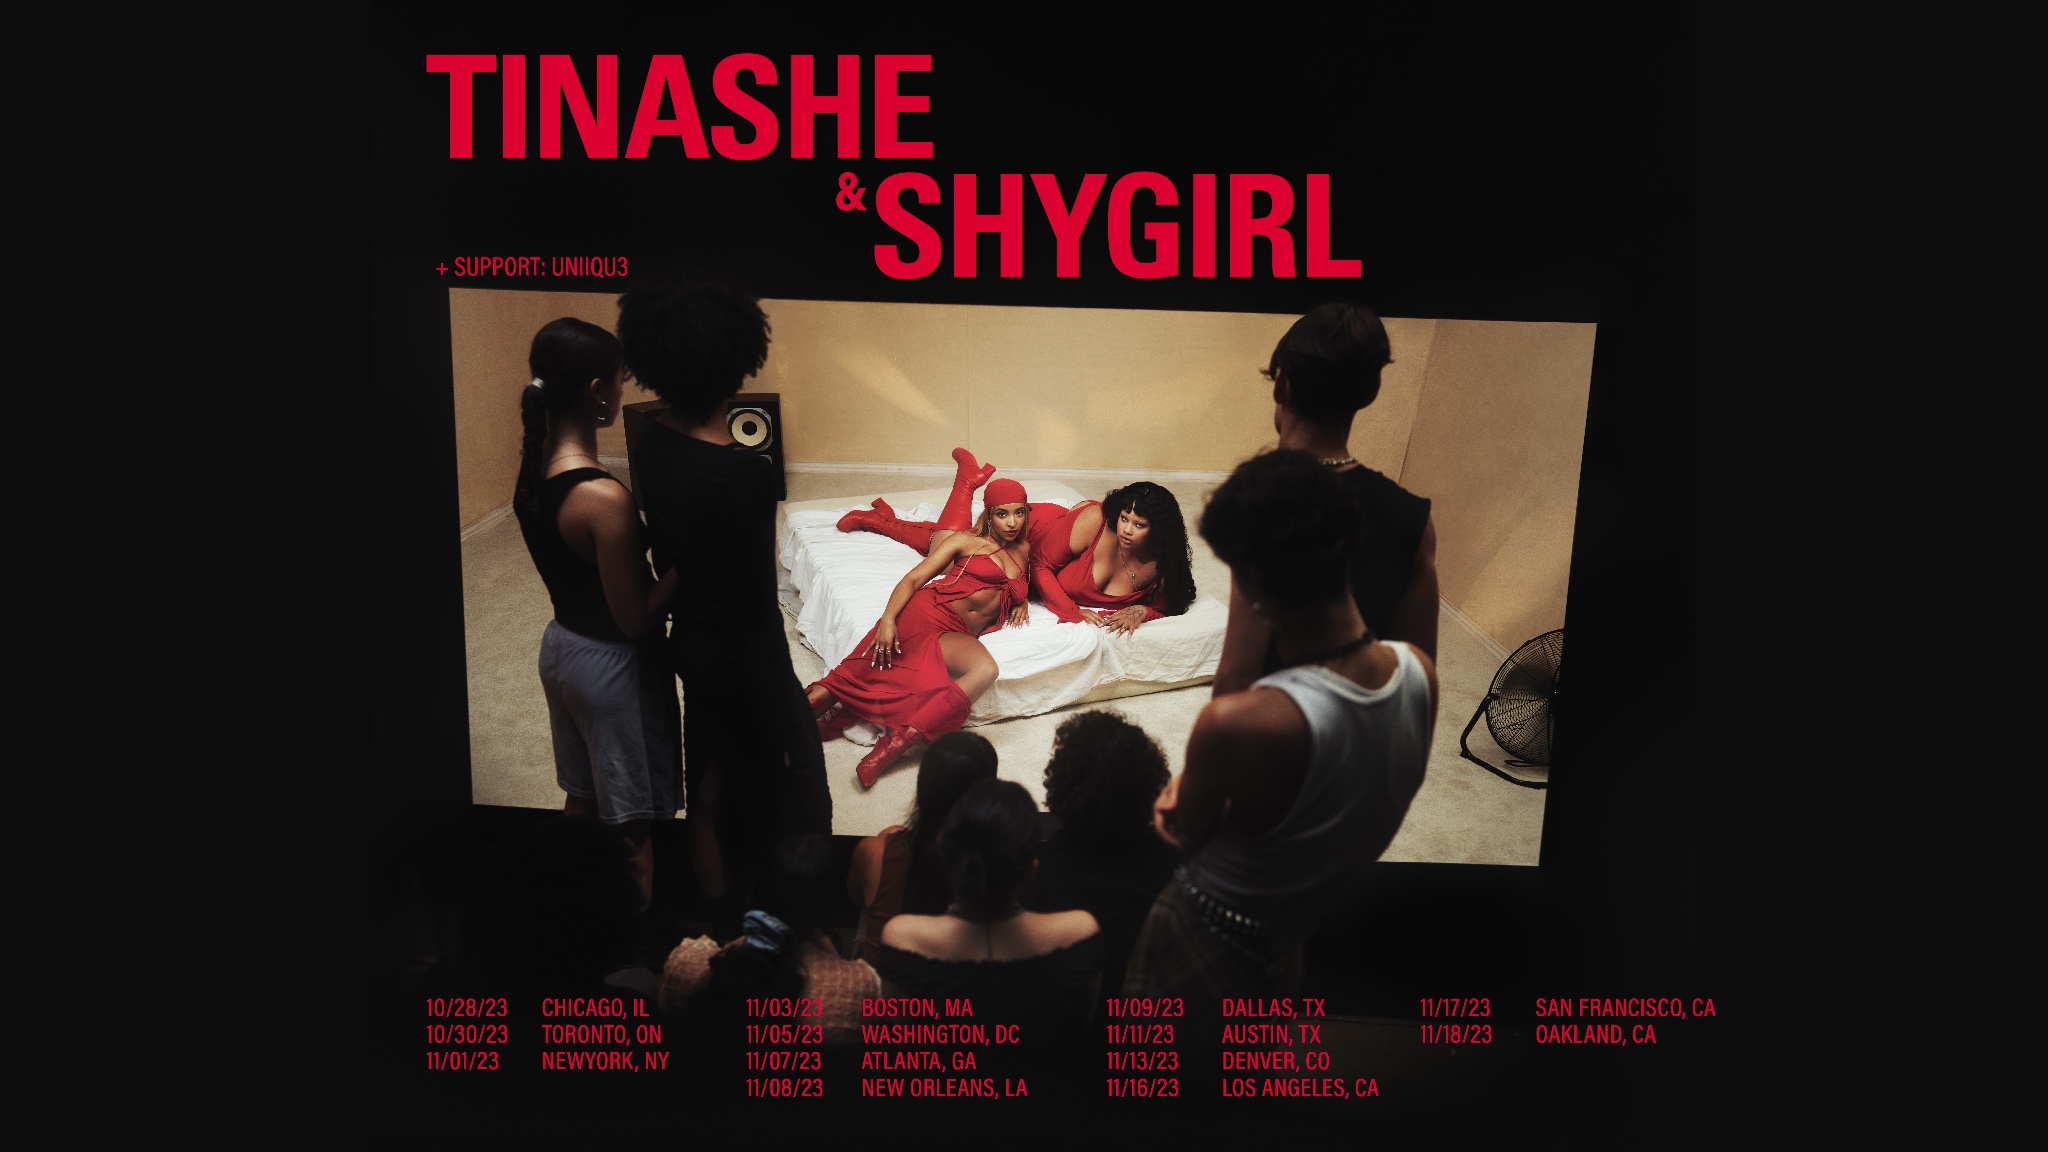 Tinashe And Shygirl Announce North American Co-Headlining Tour